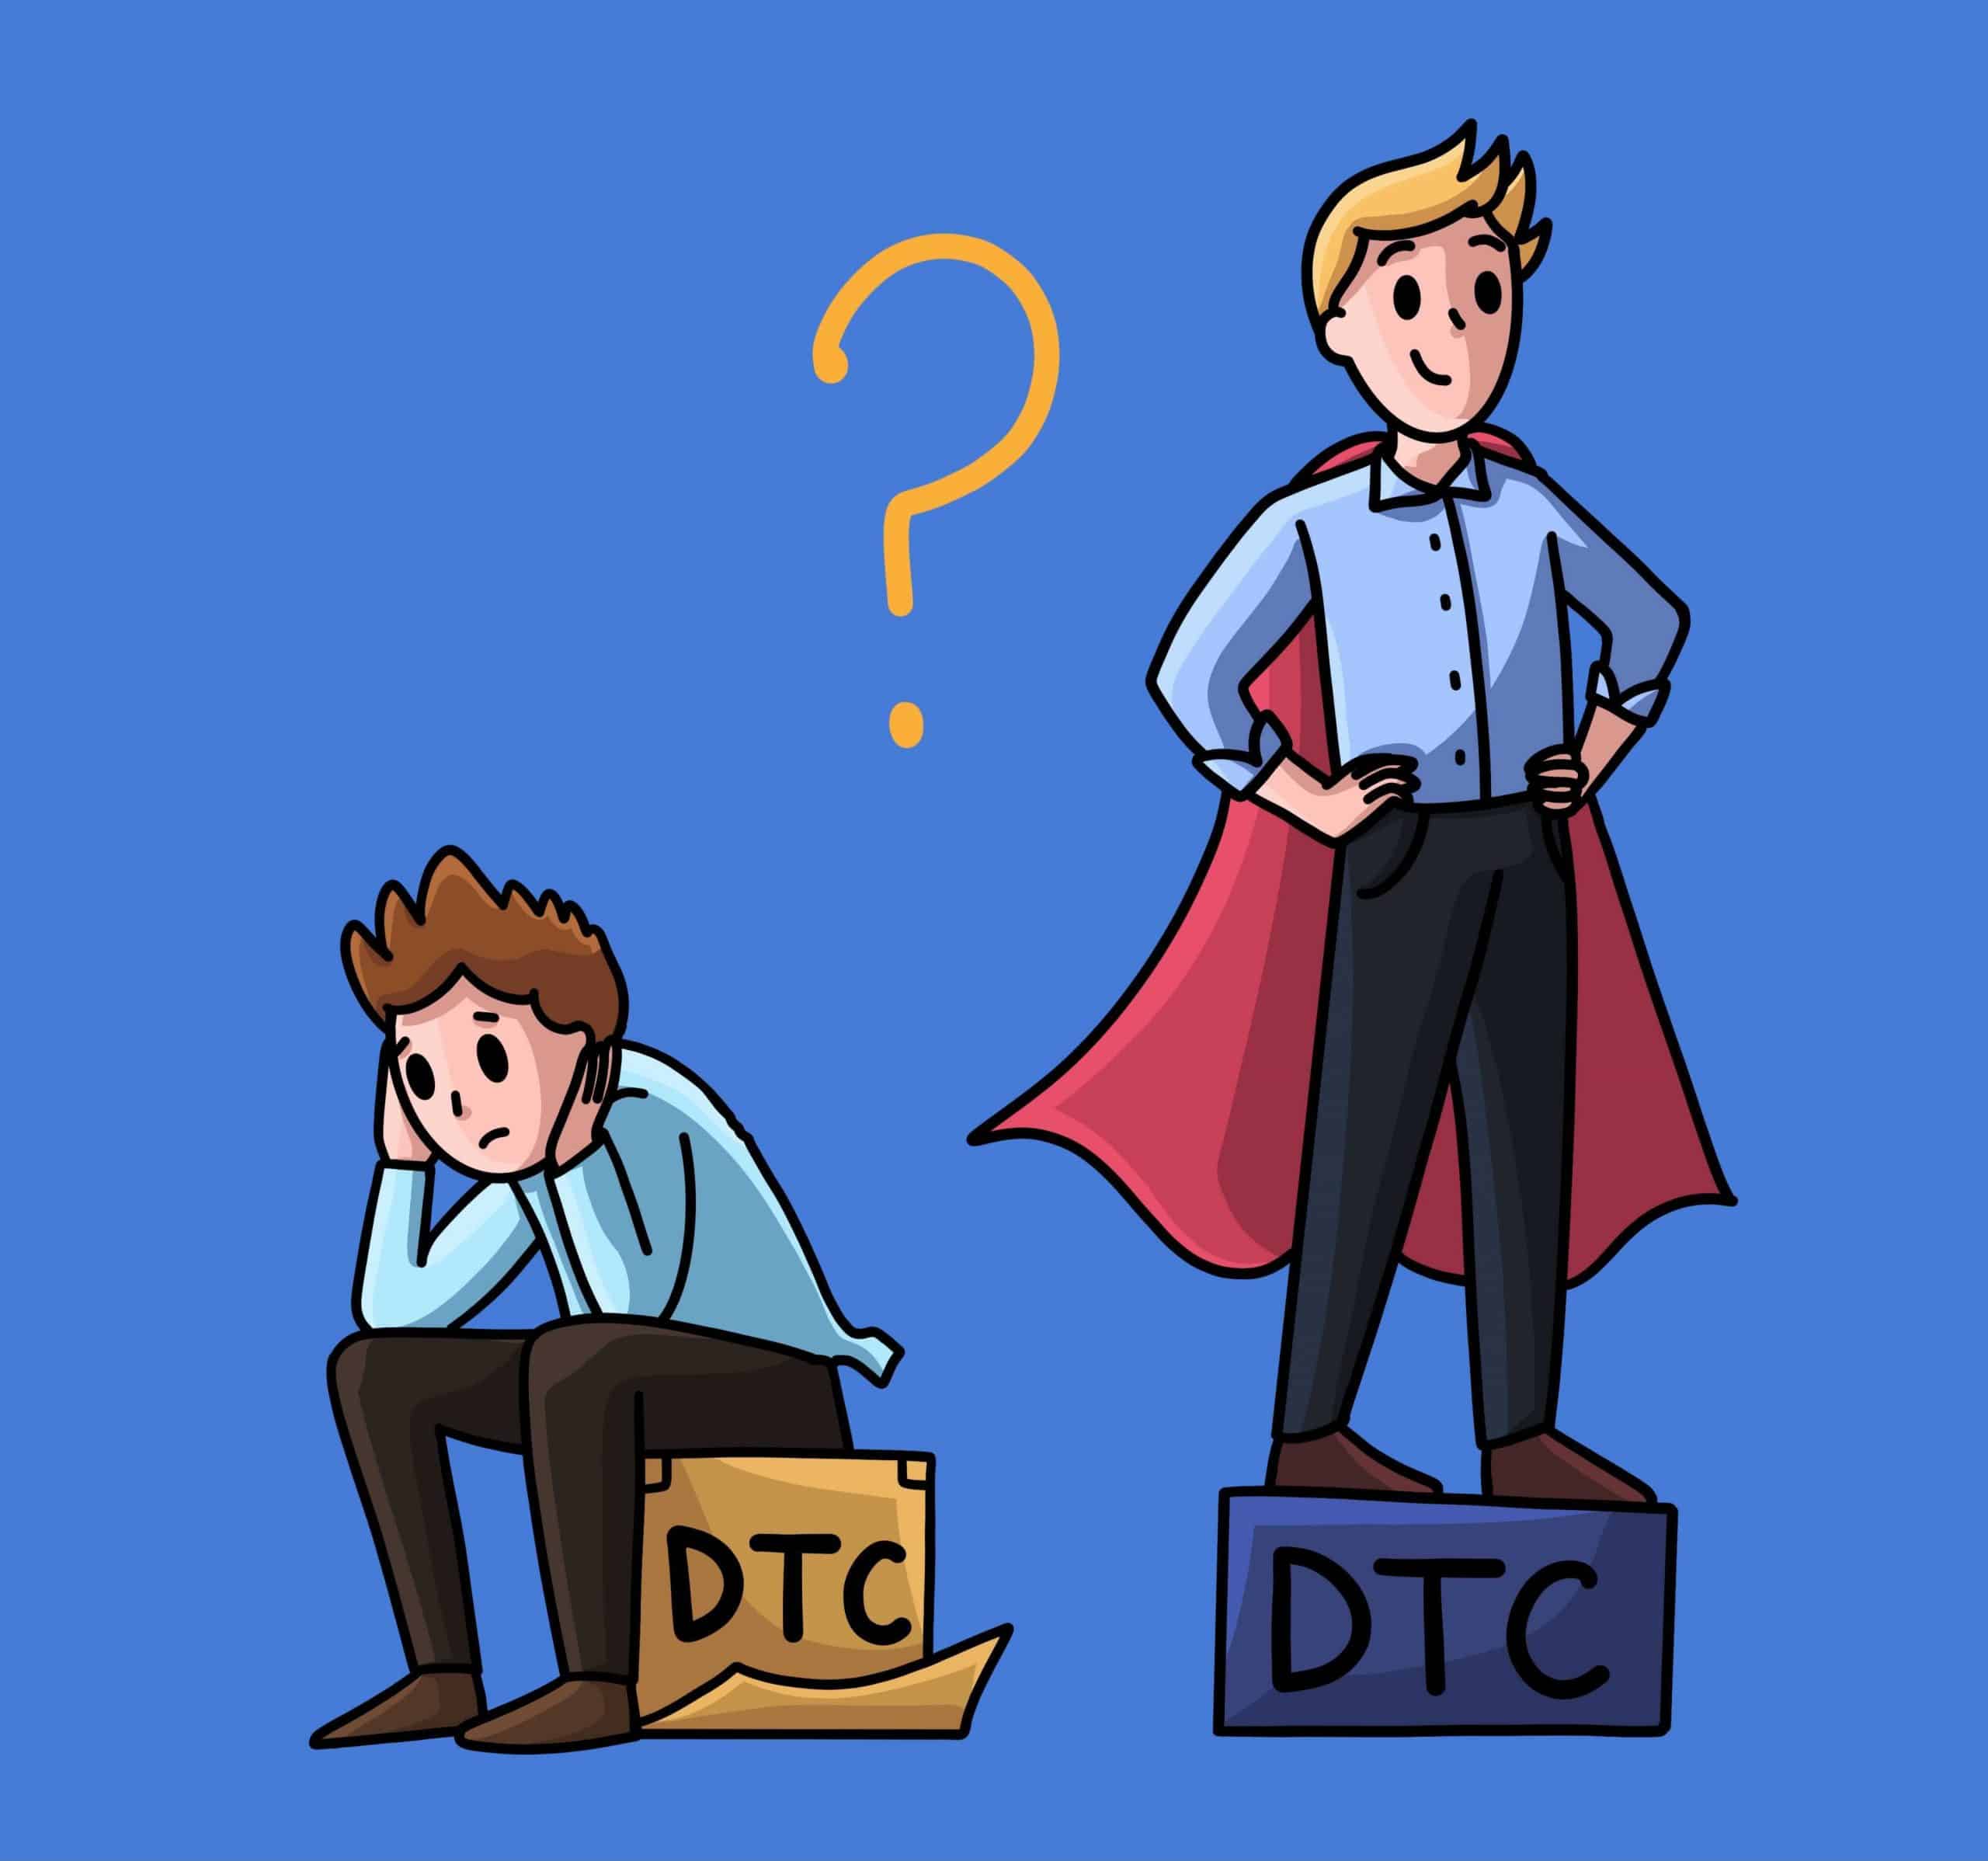 A cartoon image showing a victor standing on a DTC frame and a sore loser seating down defeated